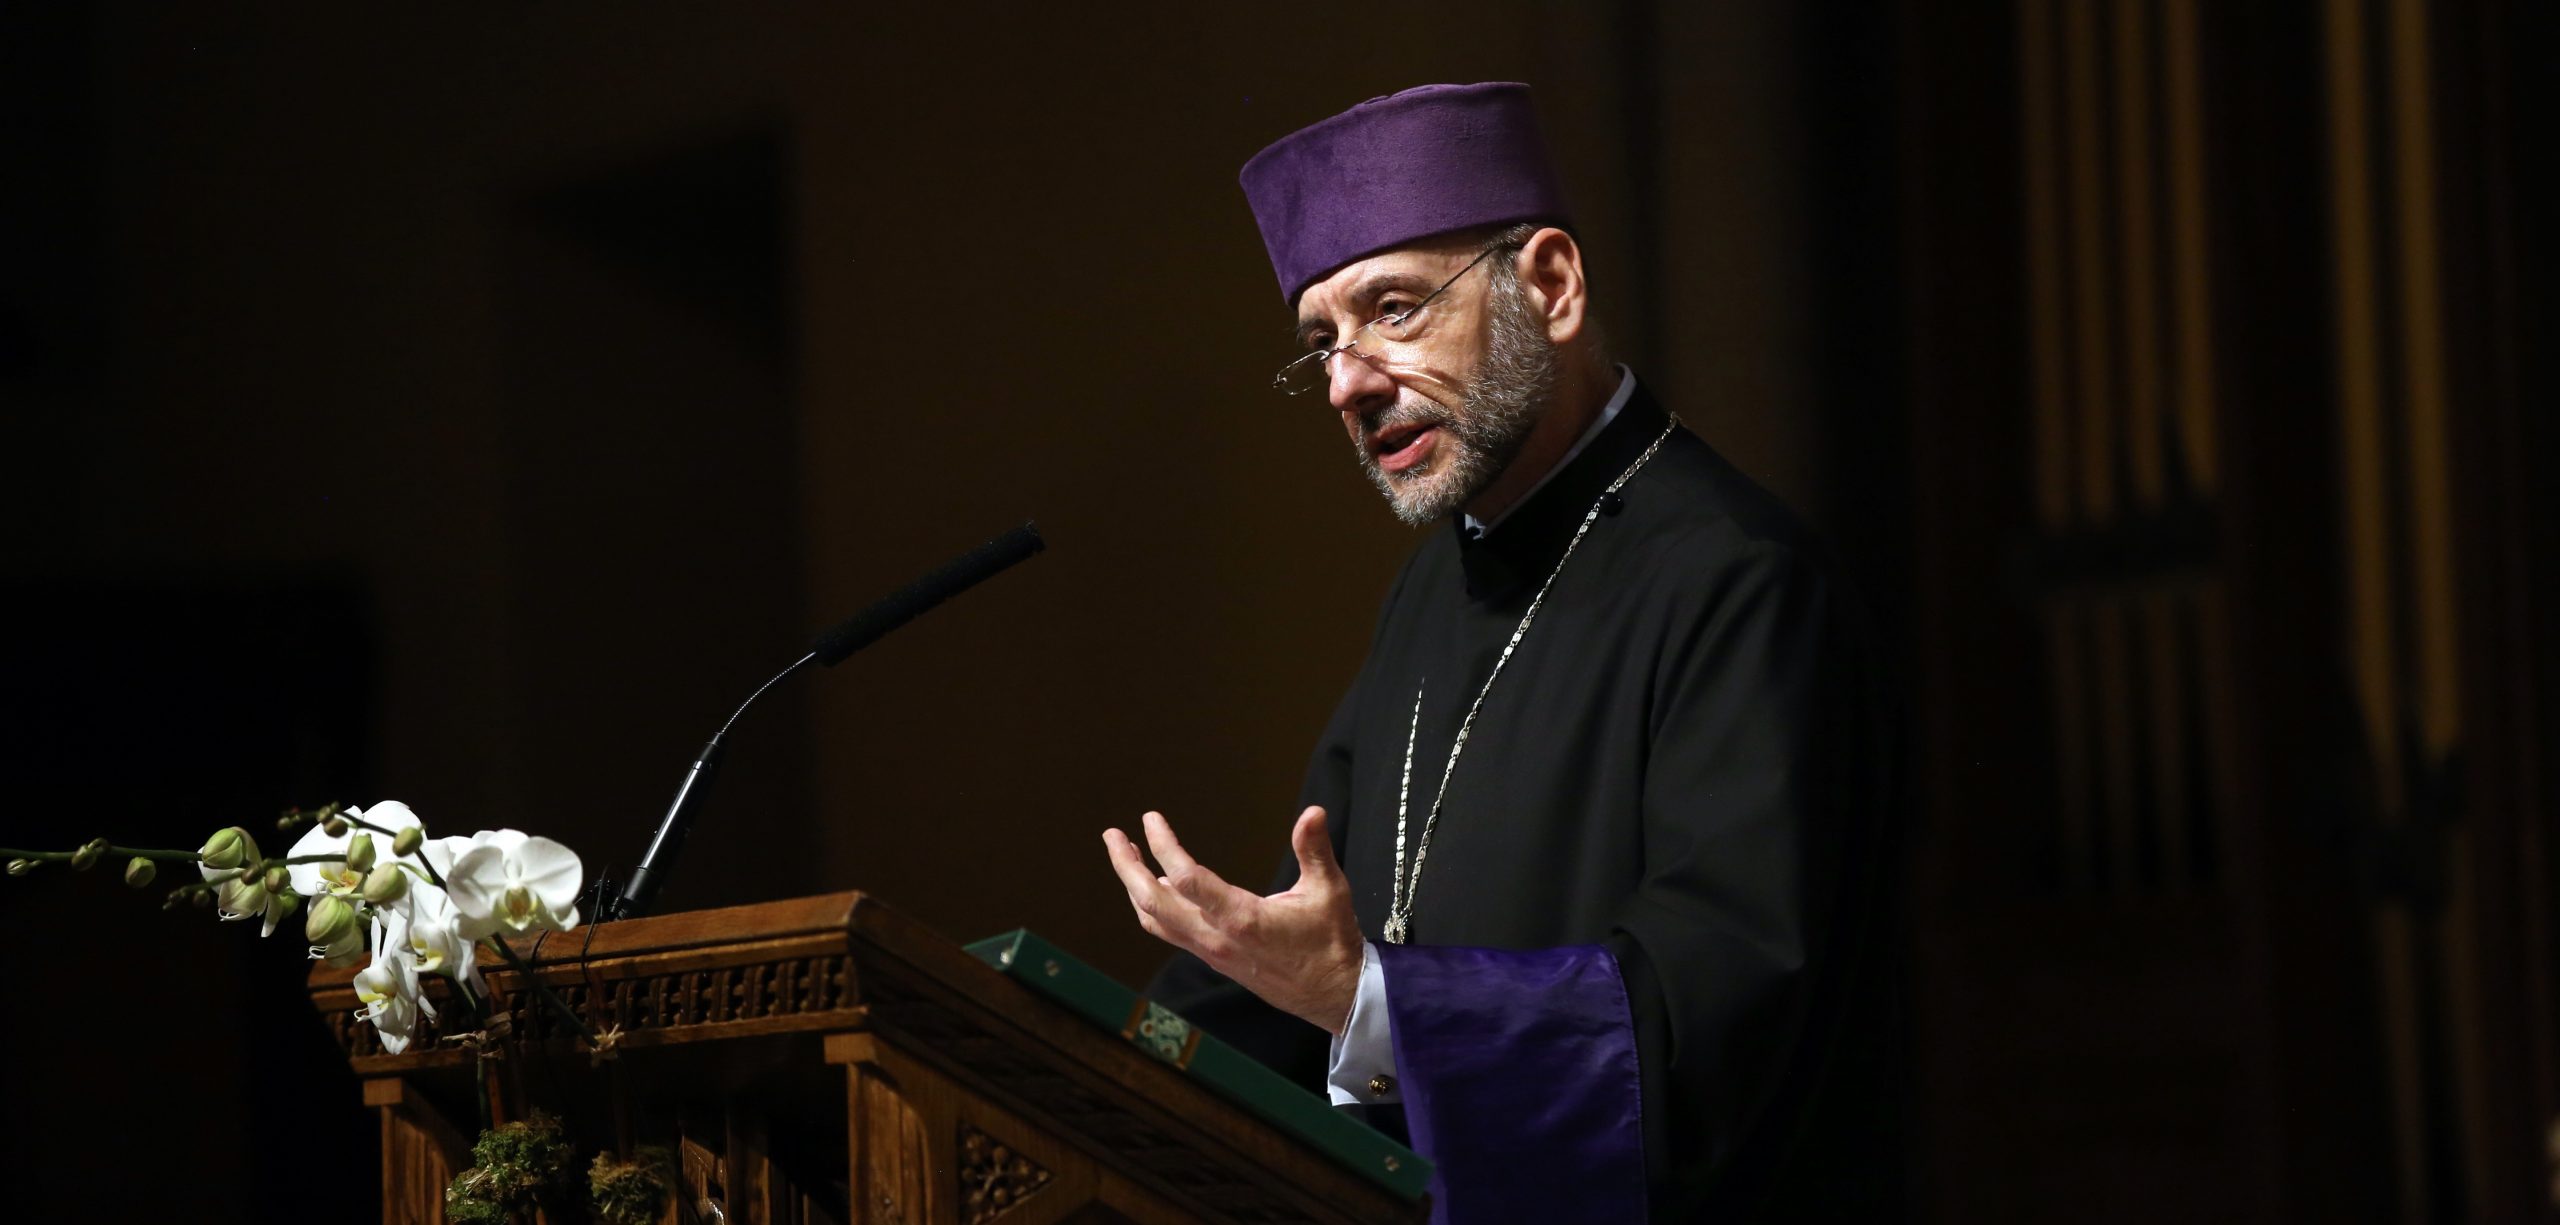 ‘The Healing Power of Penance’: Armenian Bishop Offers Advice for Pandemic Times